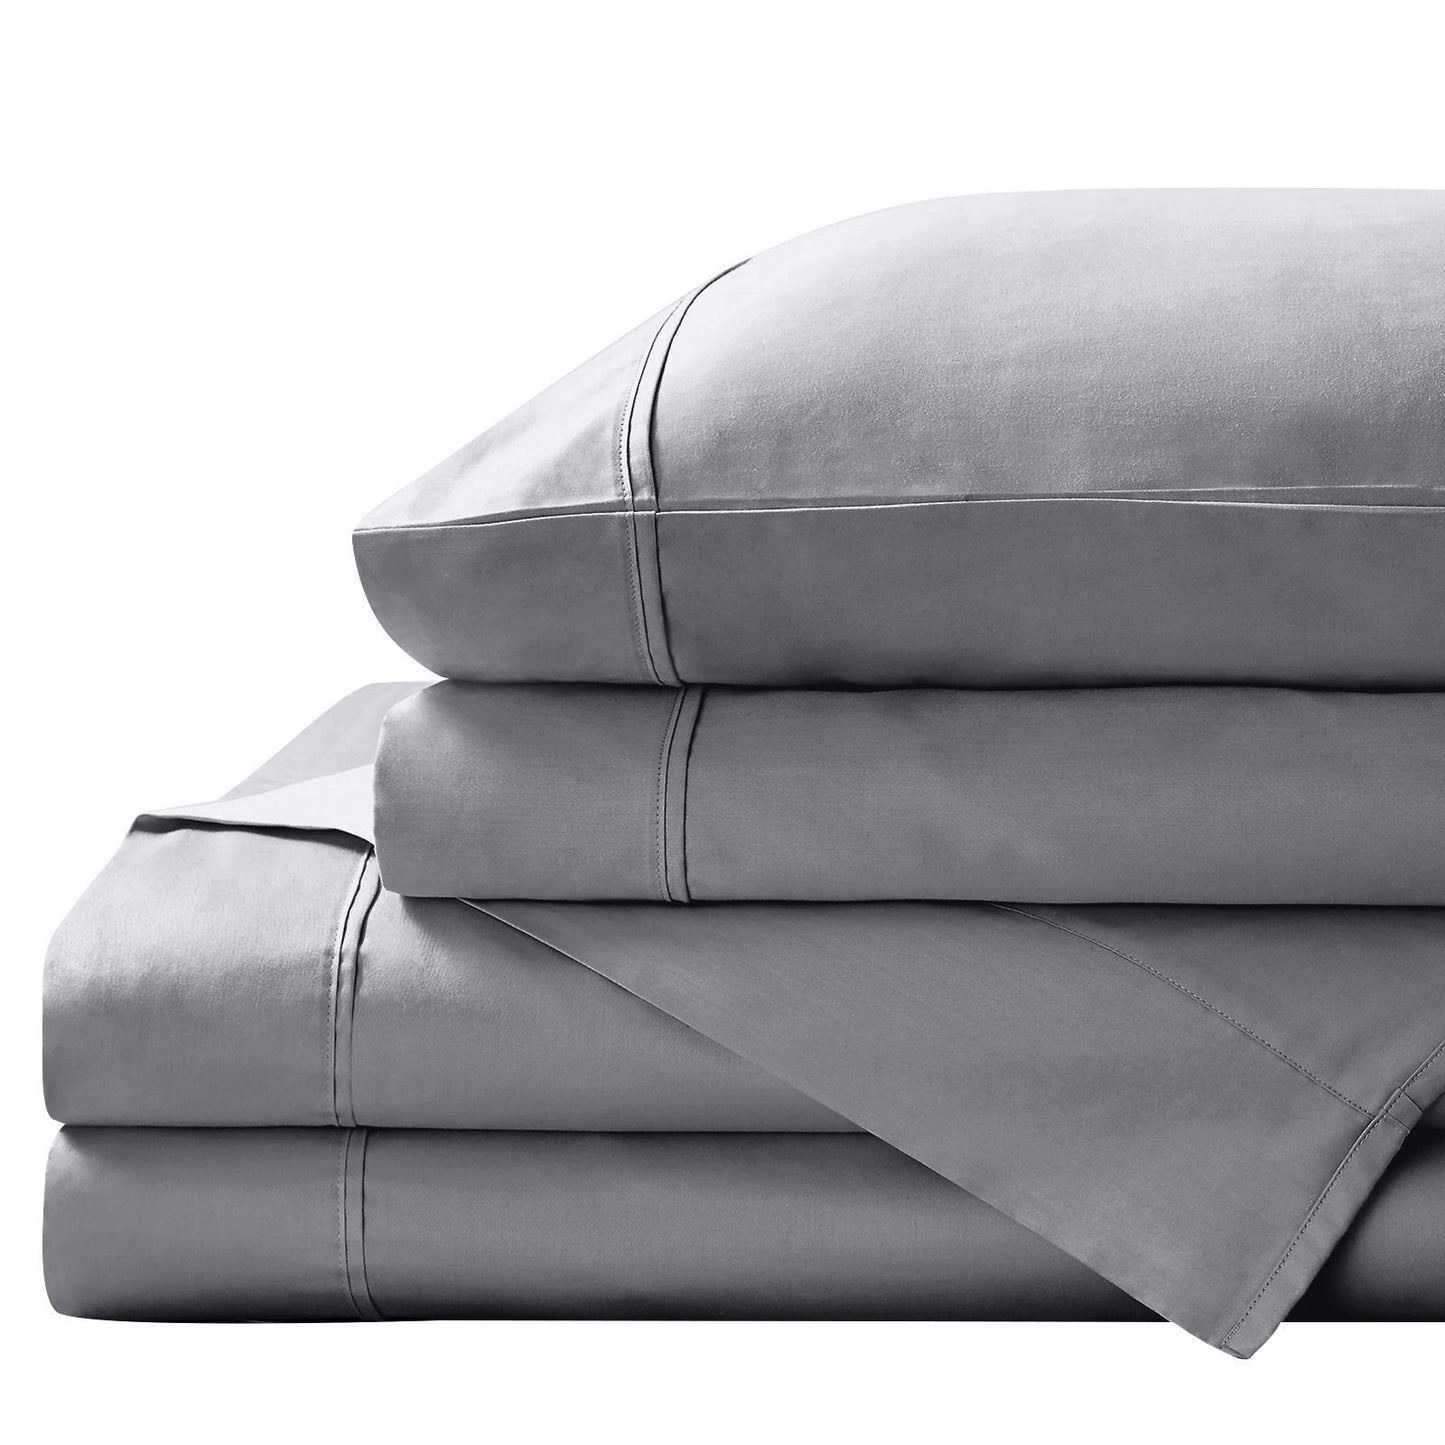 KING 1500TC 4-Piece Cotton Rich Fitted Sheet Sets - Indigo